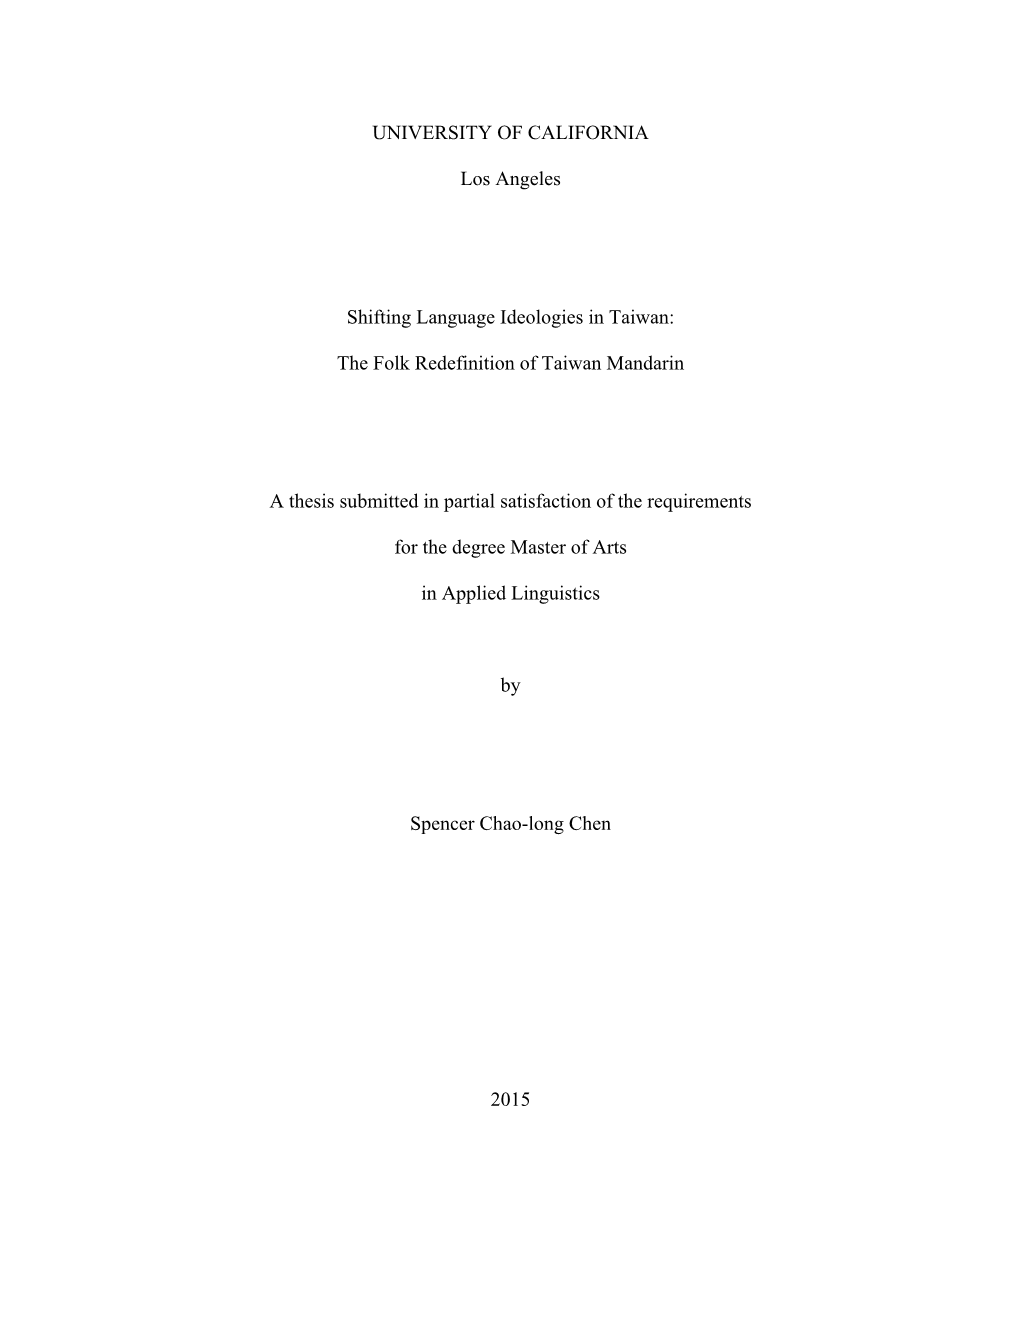 Chenspencer-Masters Thesis